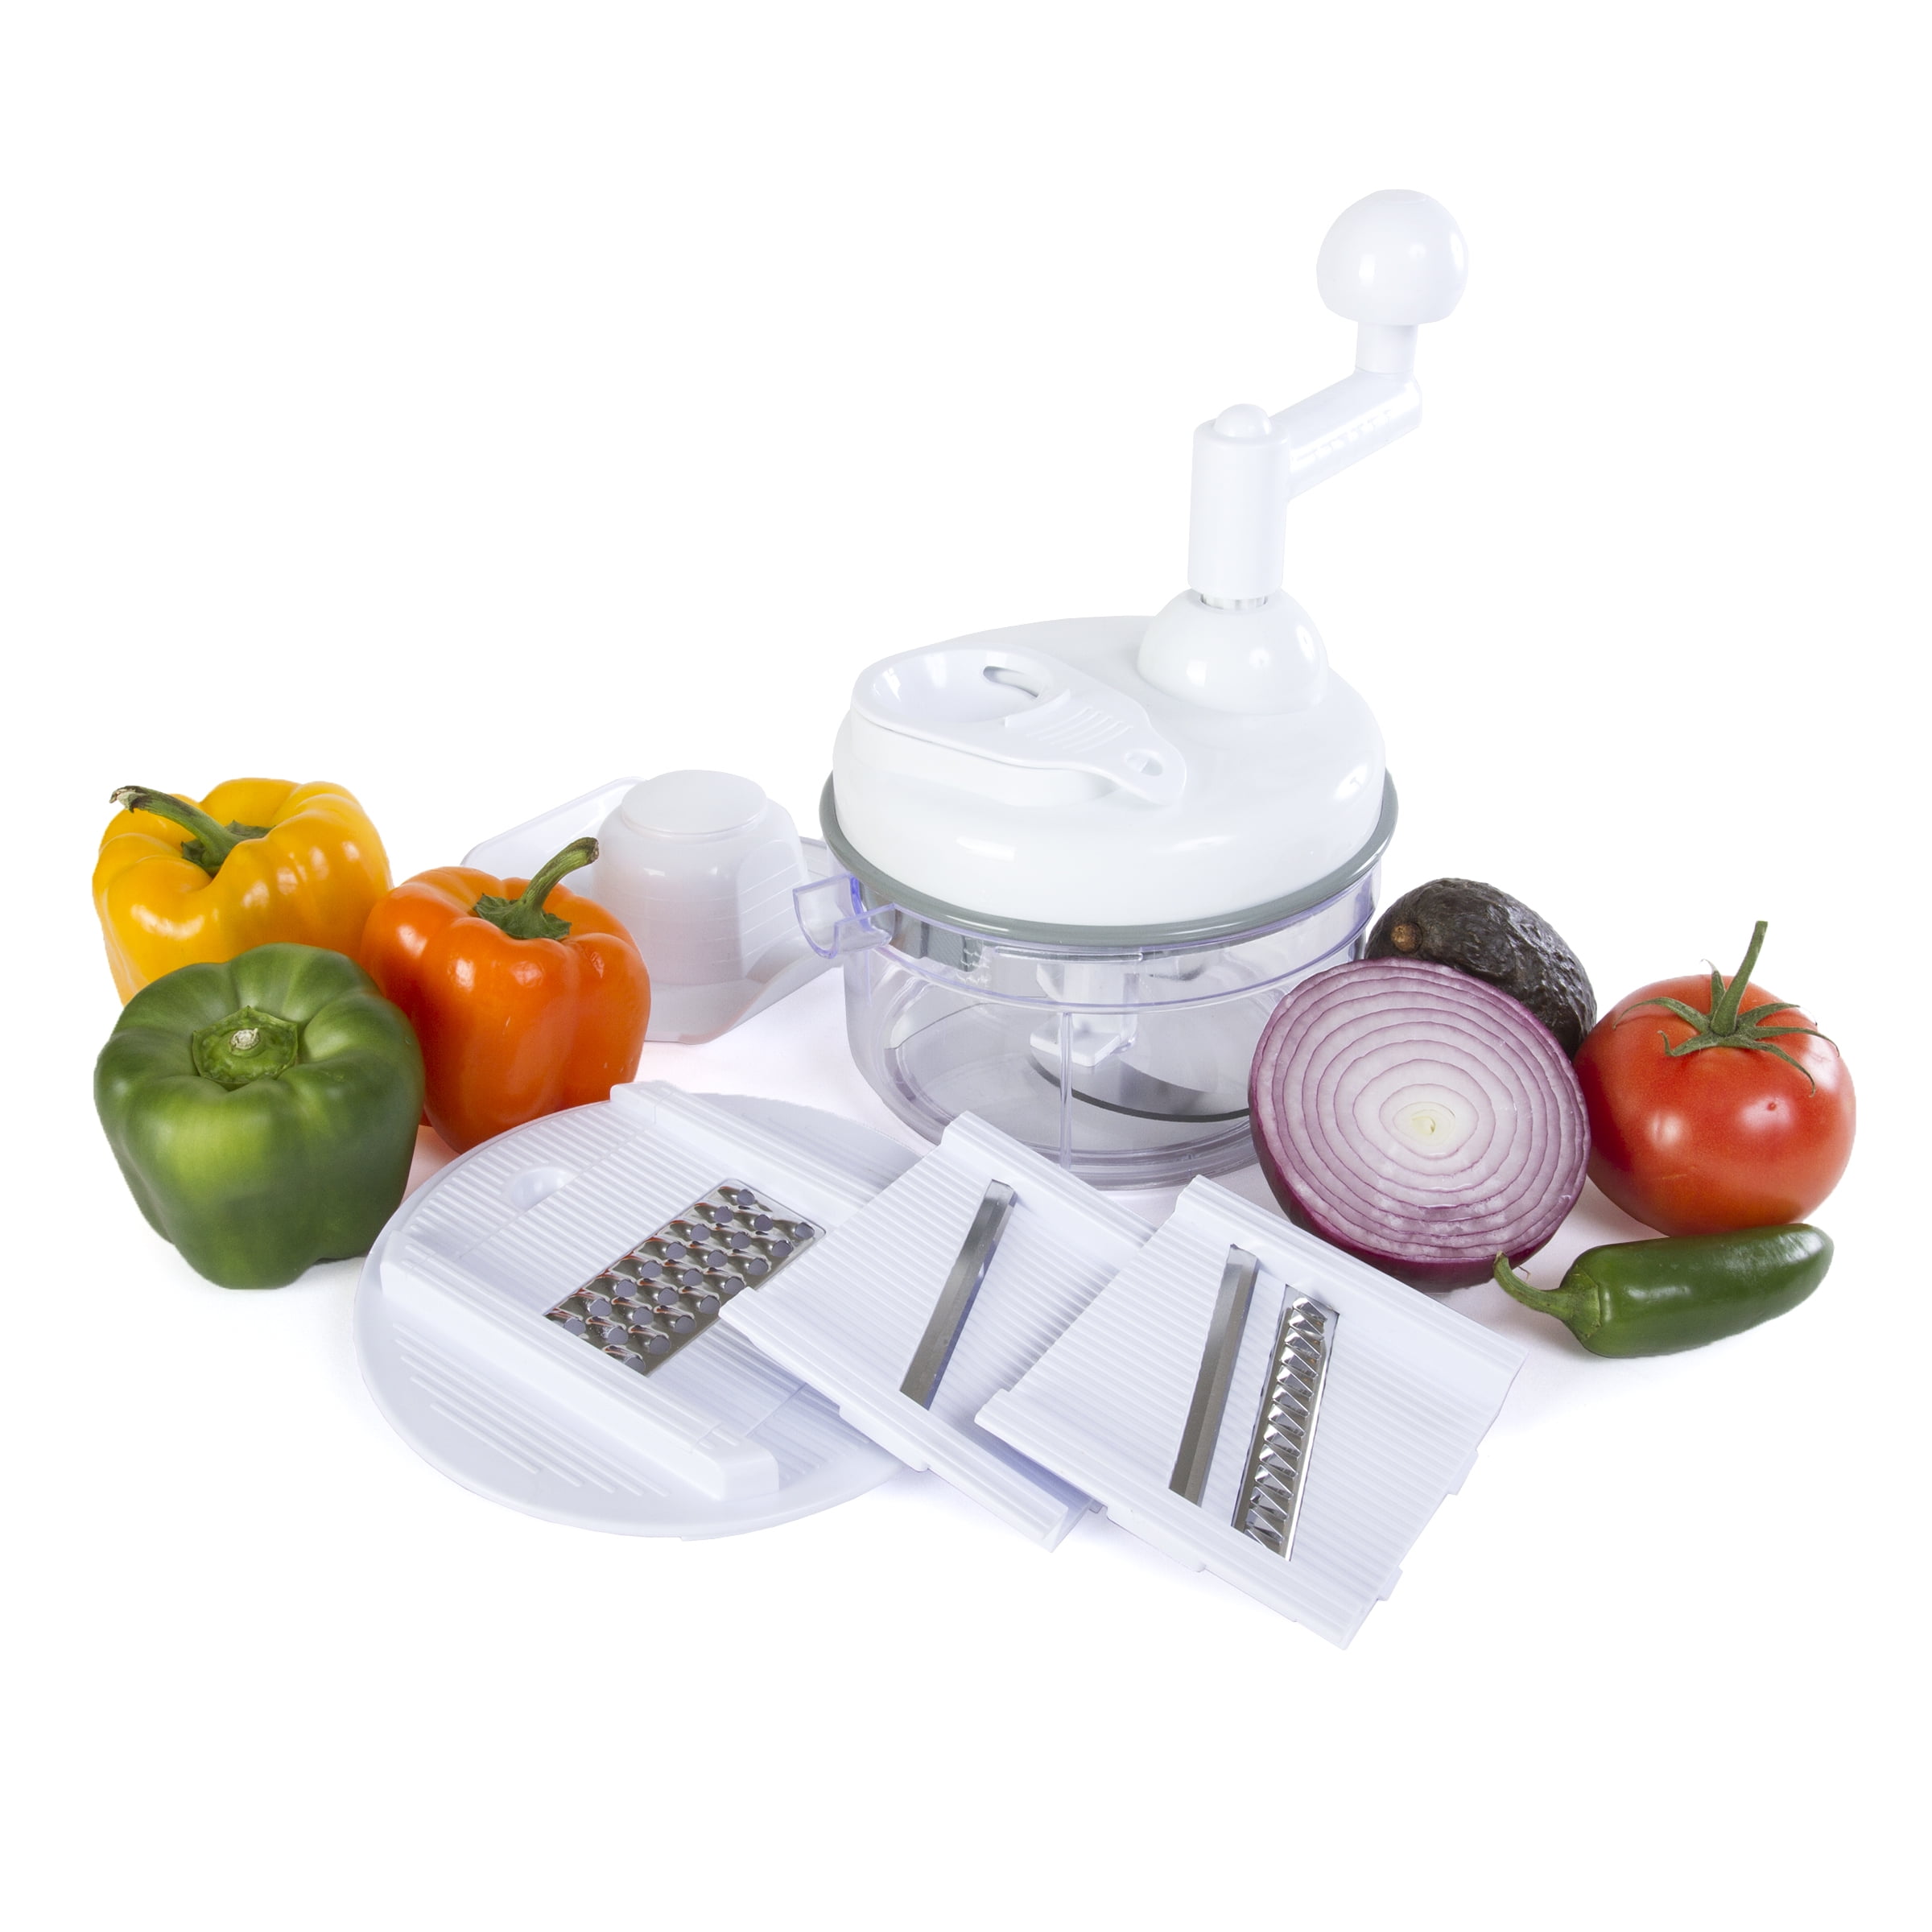 NEW Food Processor FOOD CHOPPER.GREAT FOR SALSA MAKING. By Pampered Chef  Manual